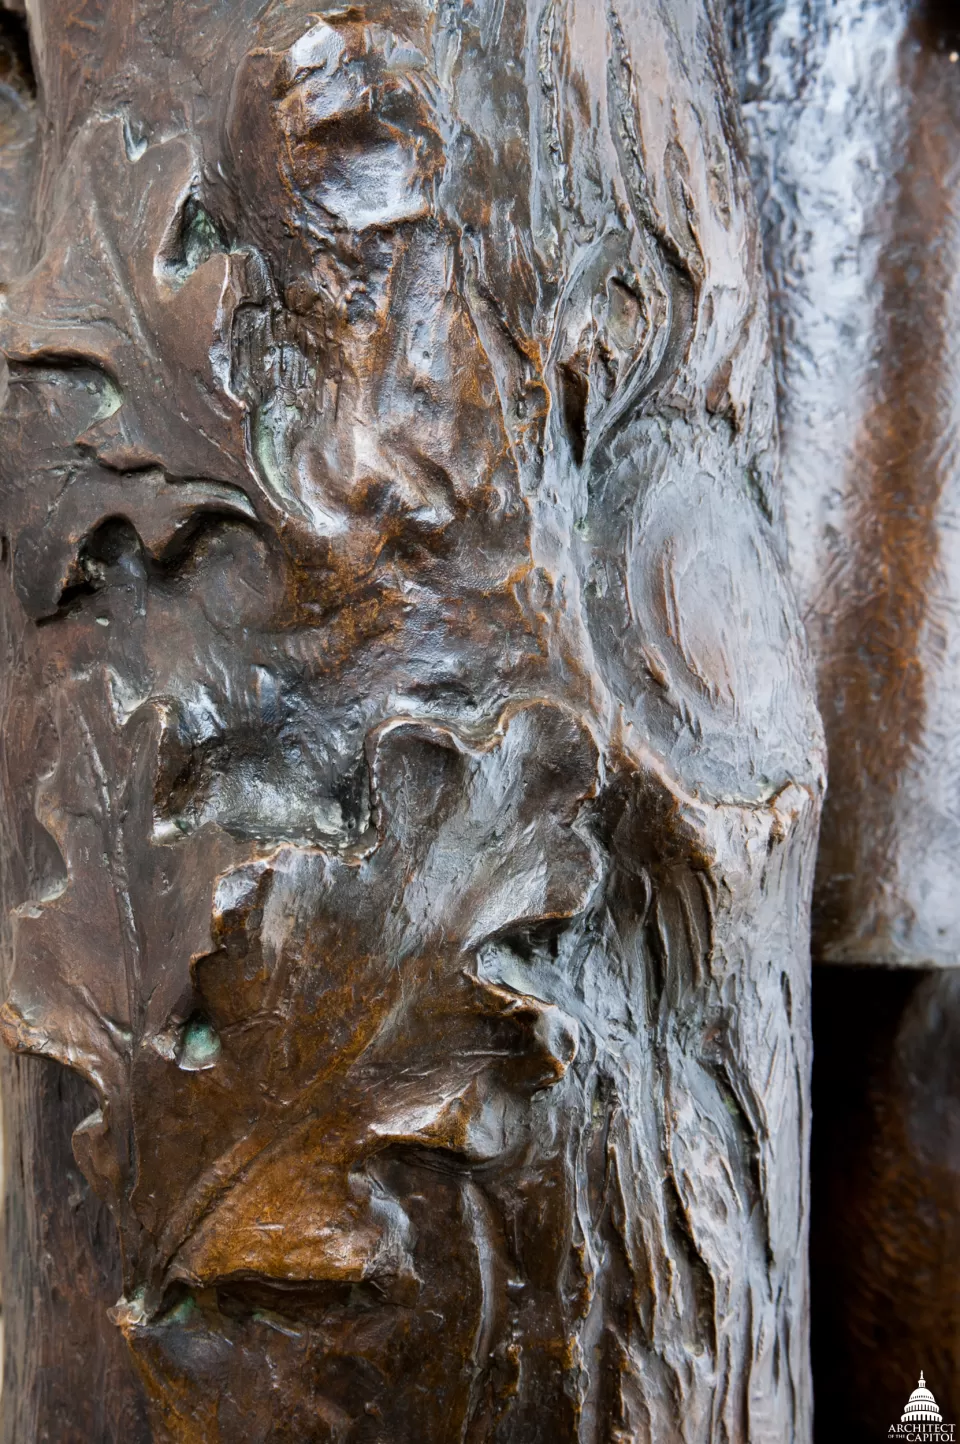 Up-close photo of tree trunk detail on J. Sterling Morton's statue in the U.S. Capitol.